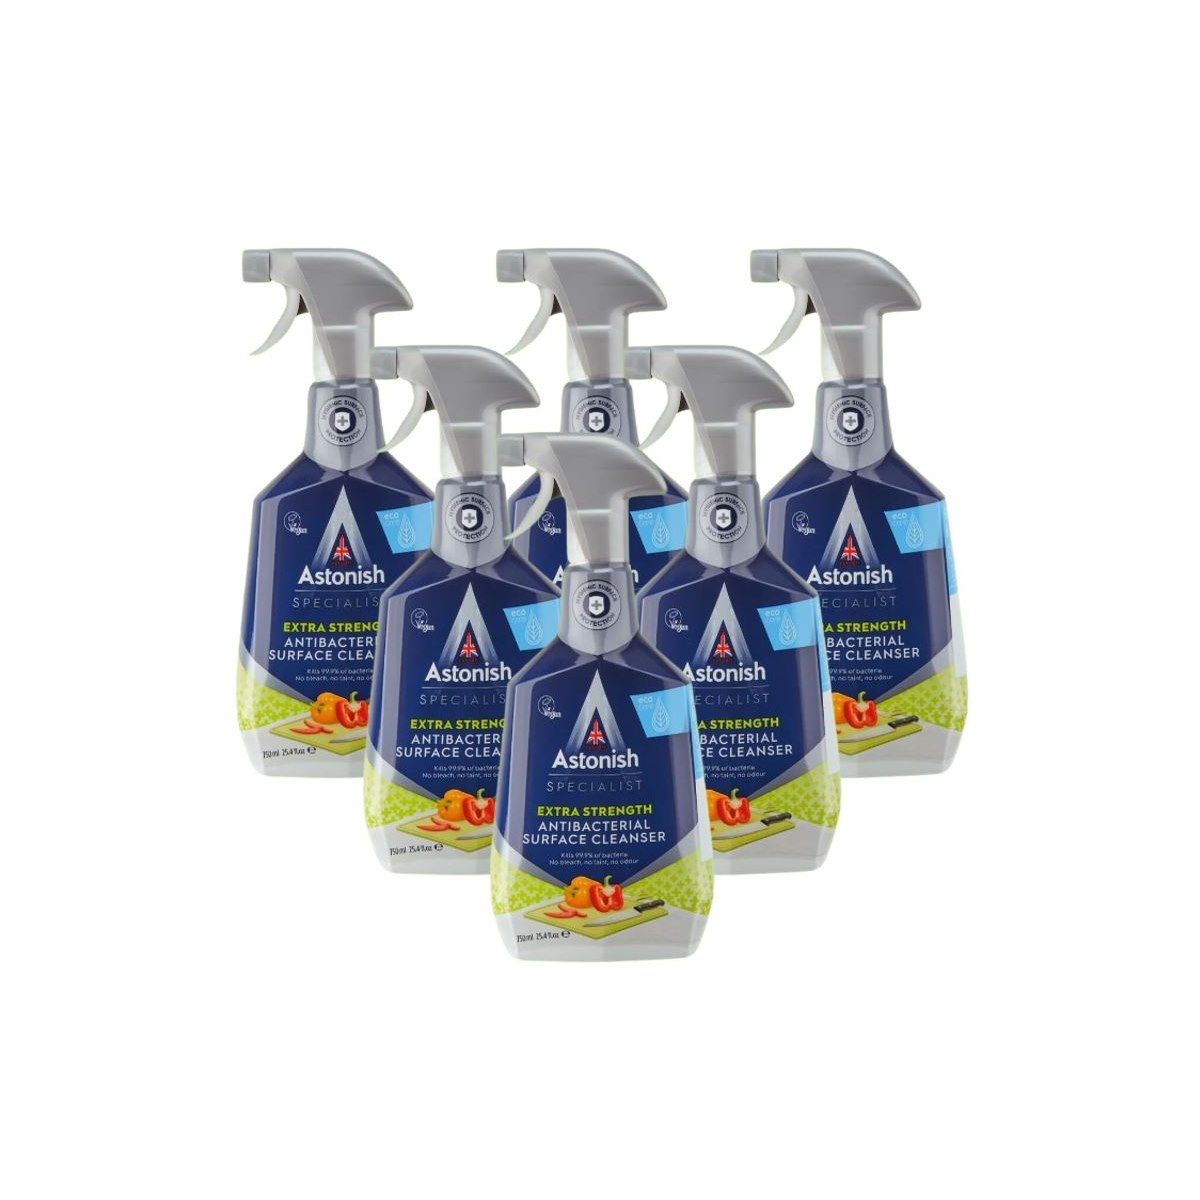 Case of 6 x Astonish Specialist Extra Strength Antibacterial Surface Cleanser